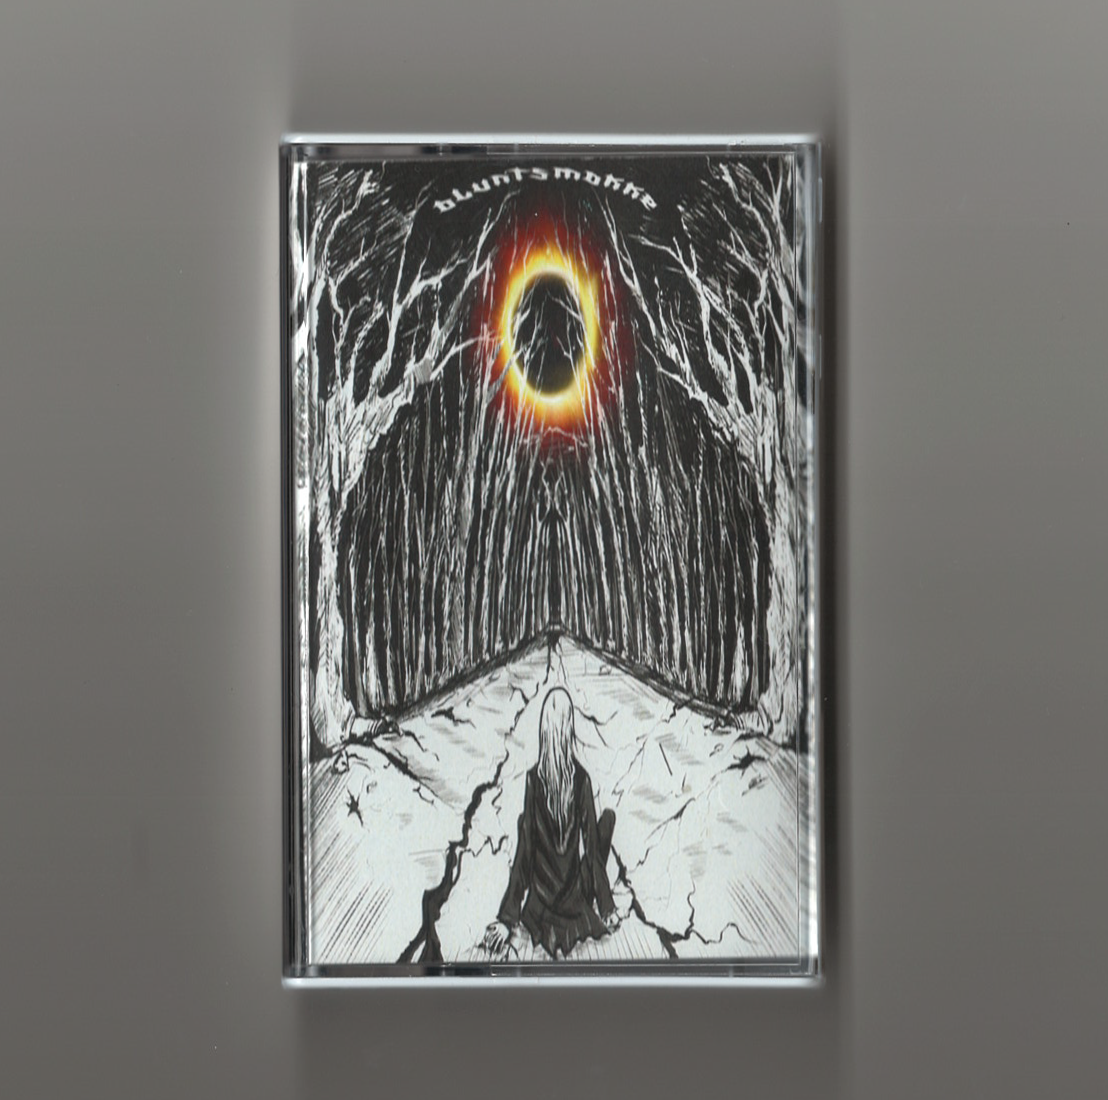 BLUNTSMOKKE - THE ATONEMENT - LIMITED CASSETTE TAPE